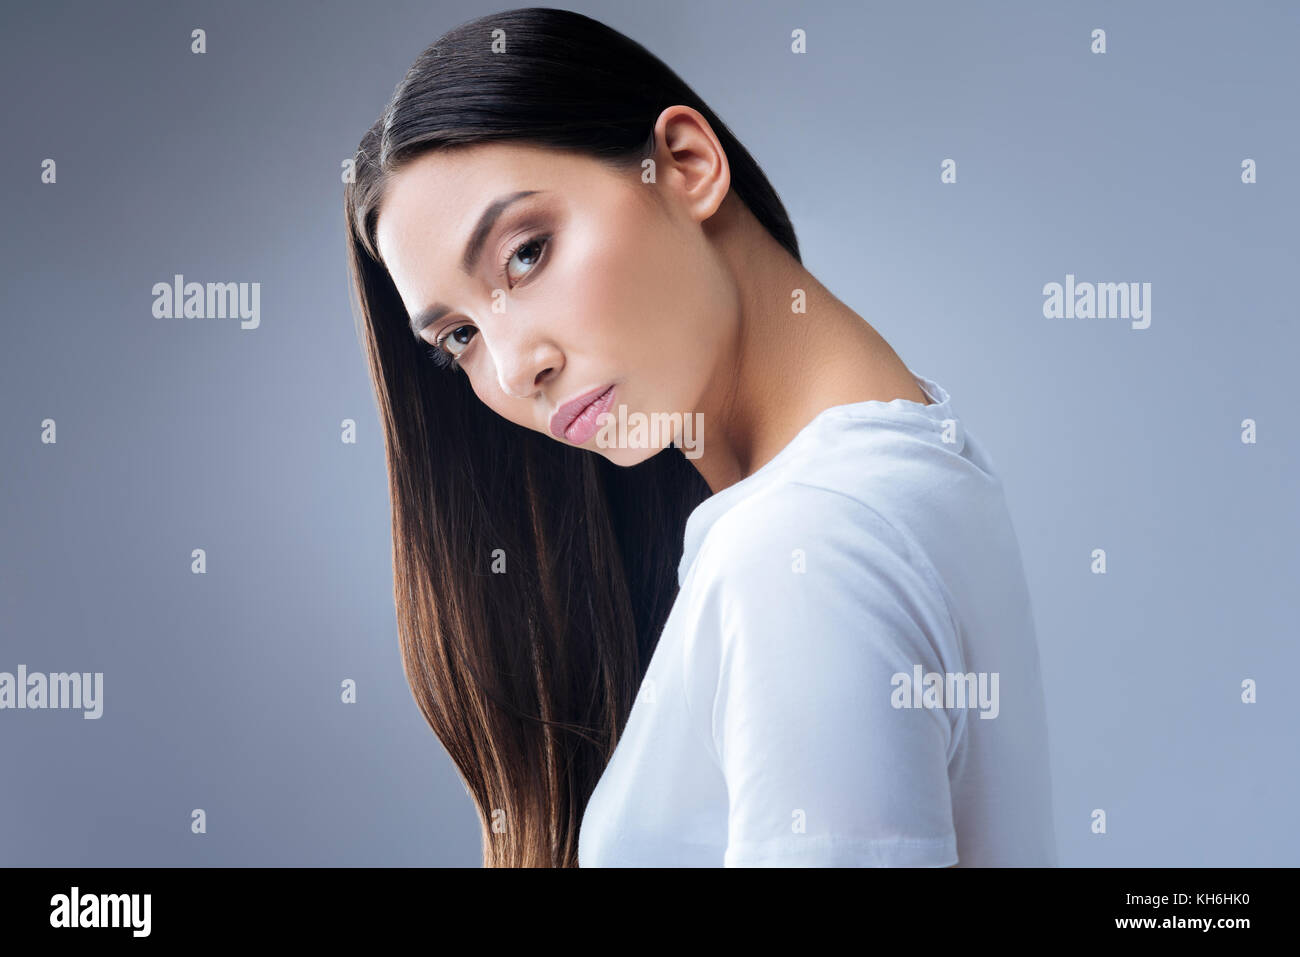 Serious calm woman looking attentively in front of herself Stock Photo